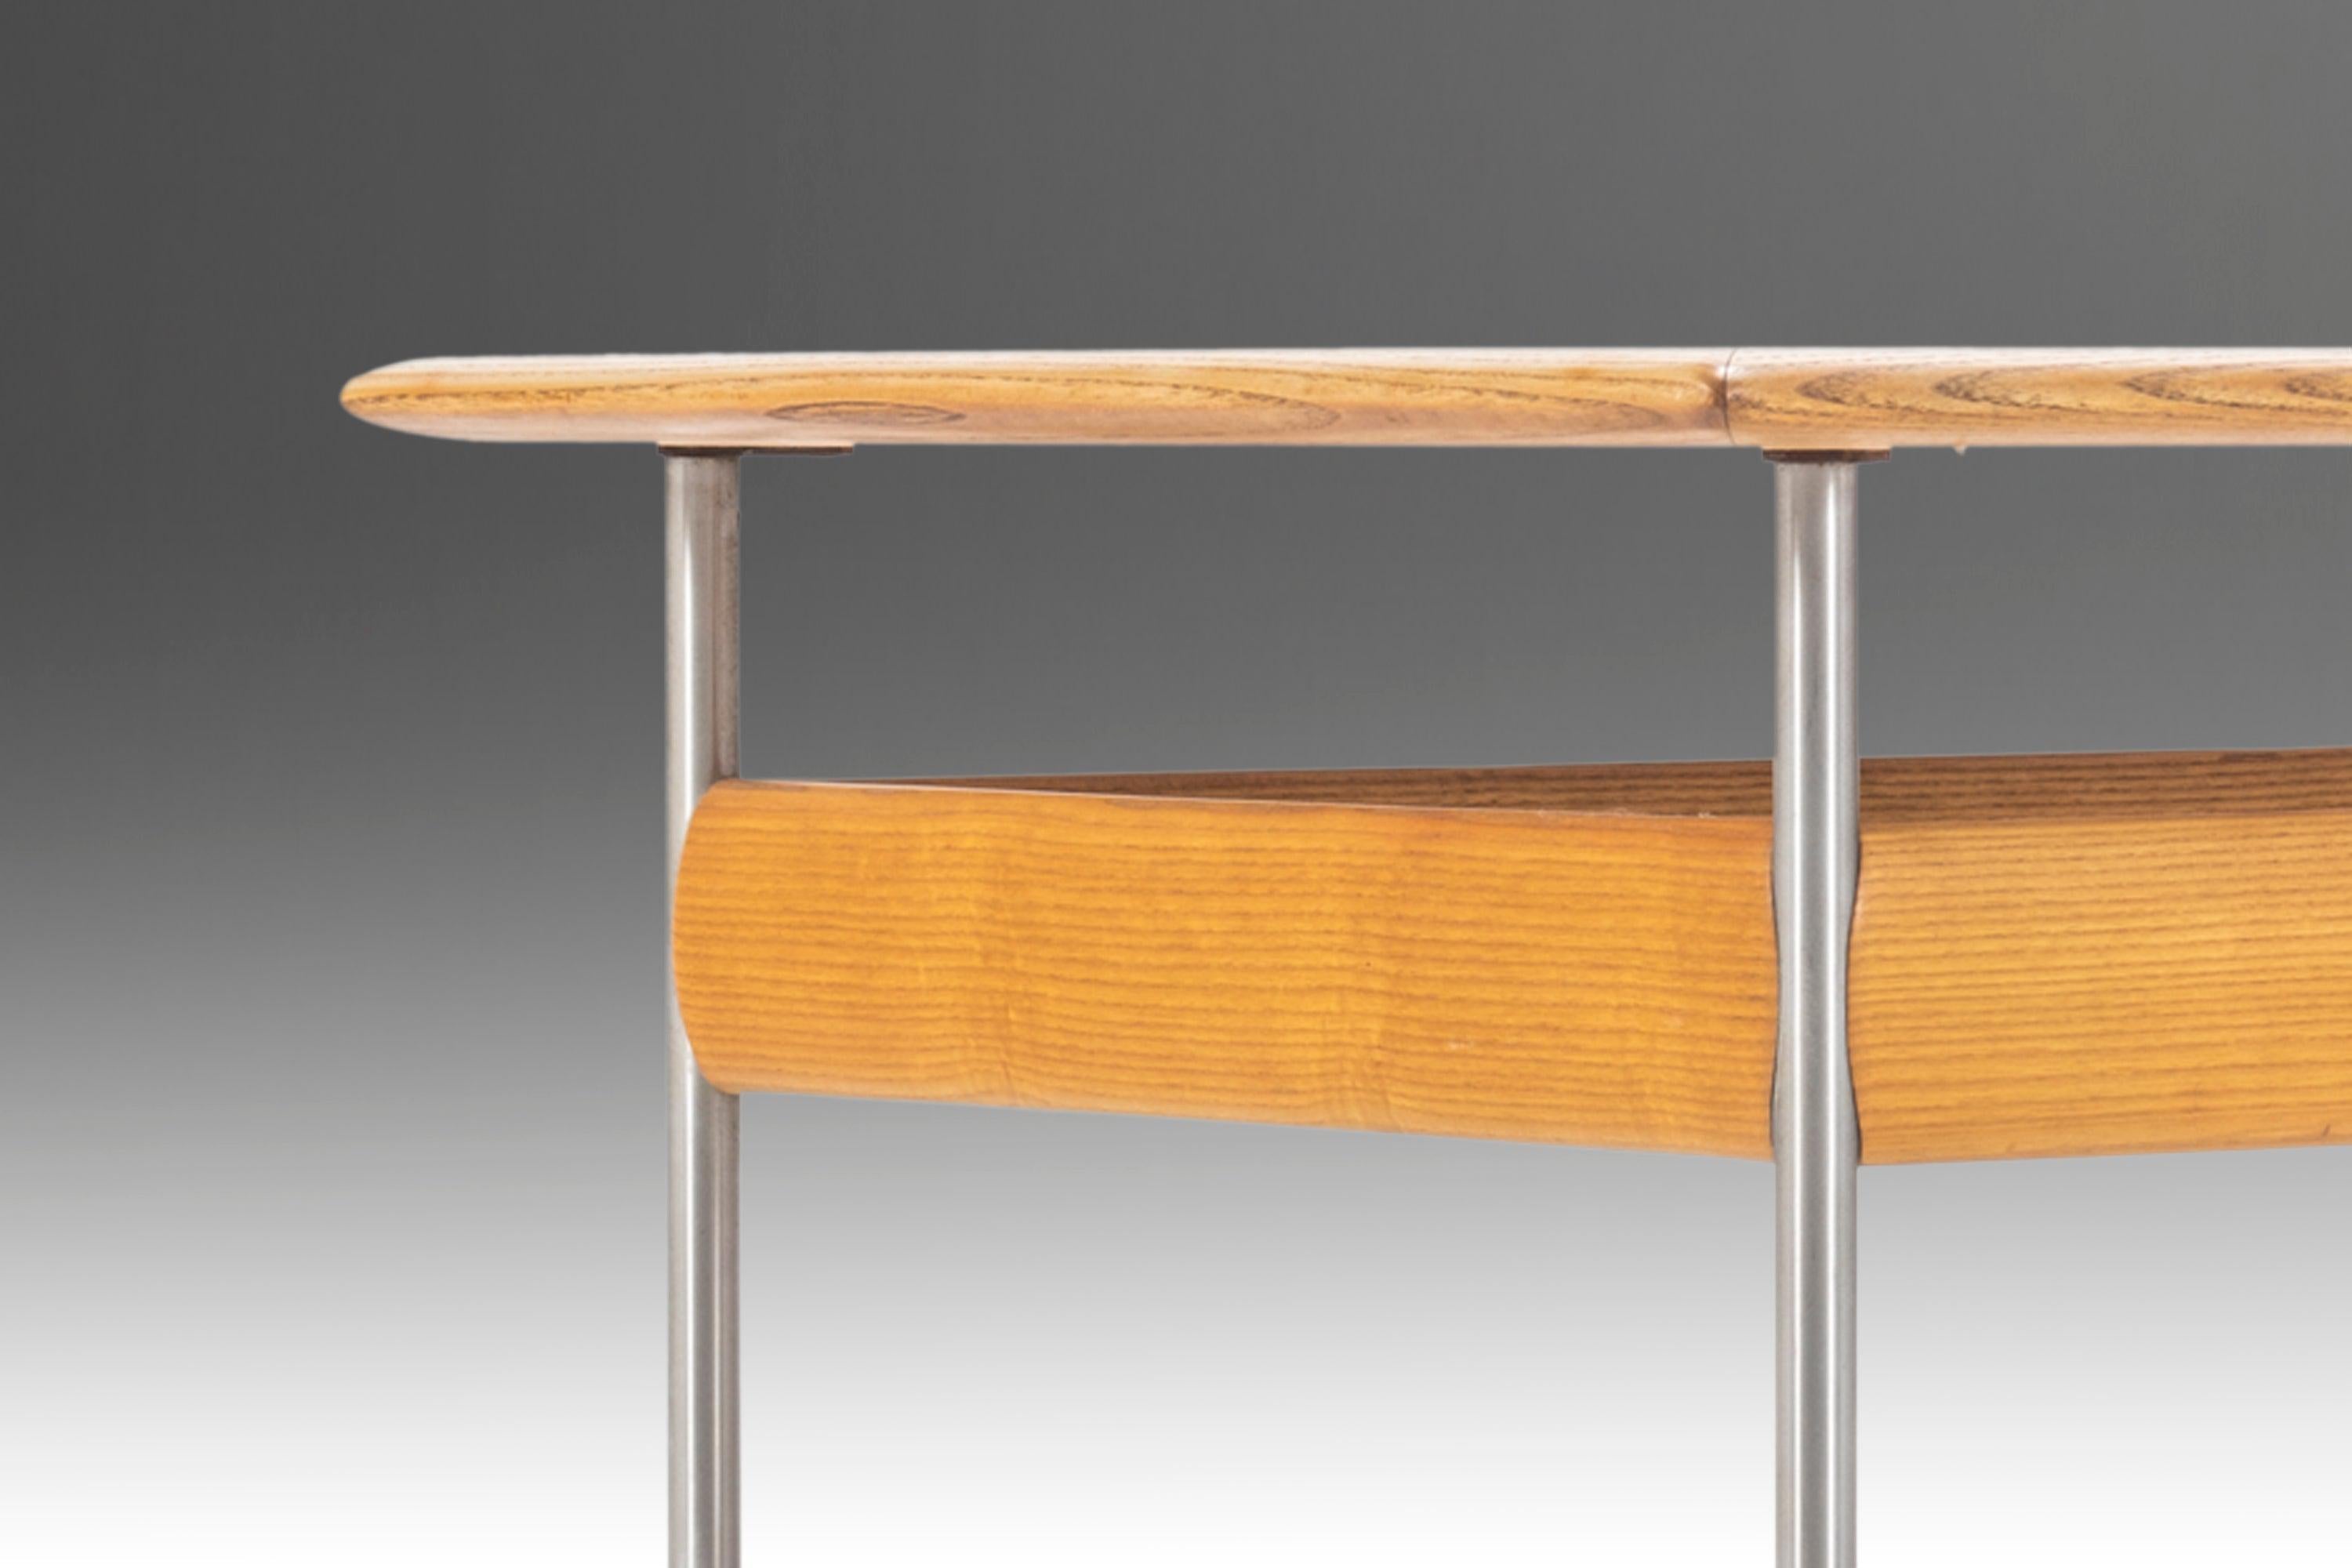 Scandinavian Oak Coffee Table Attributed to Sven Ivar Dysthe for Dokka, c. 1970s For Sale 8